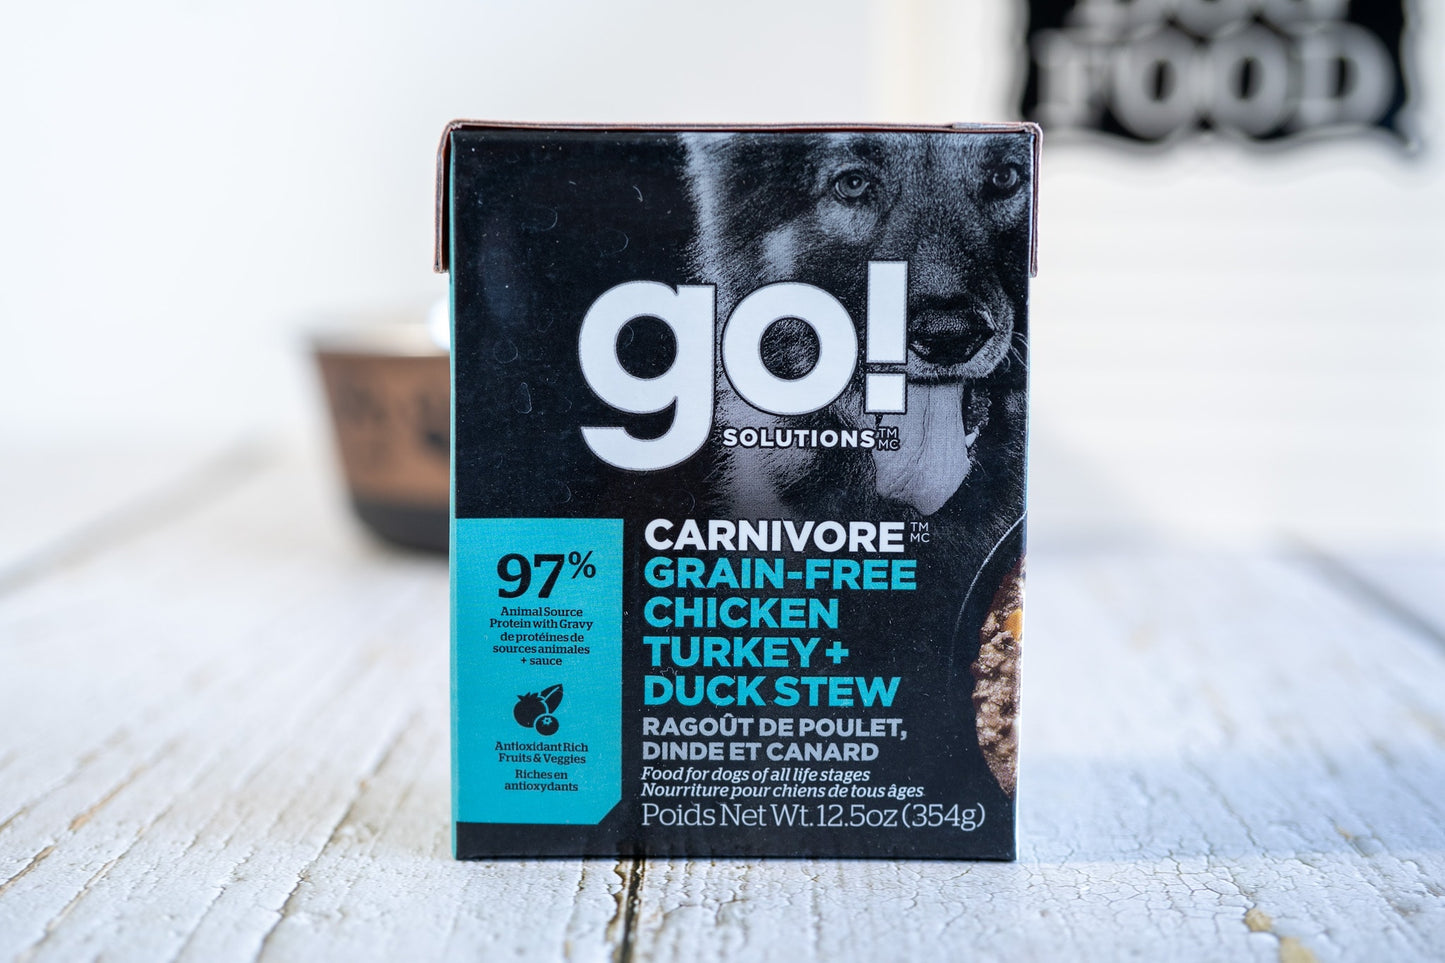 Chicken, turkey and duck stew pâté for dogs of all life stages from Go Solutions!